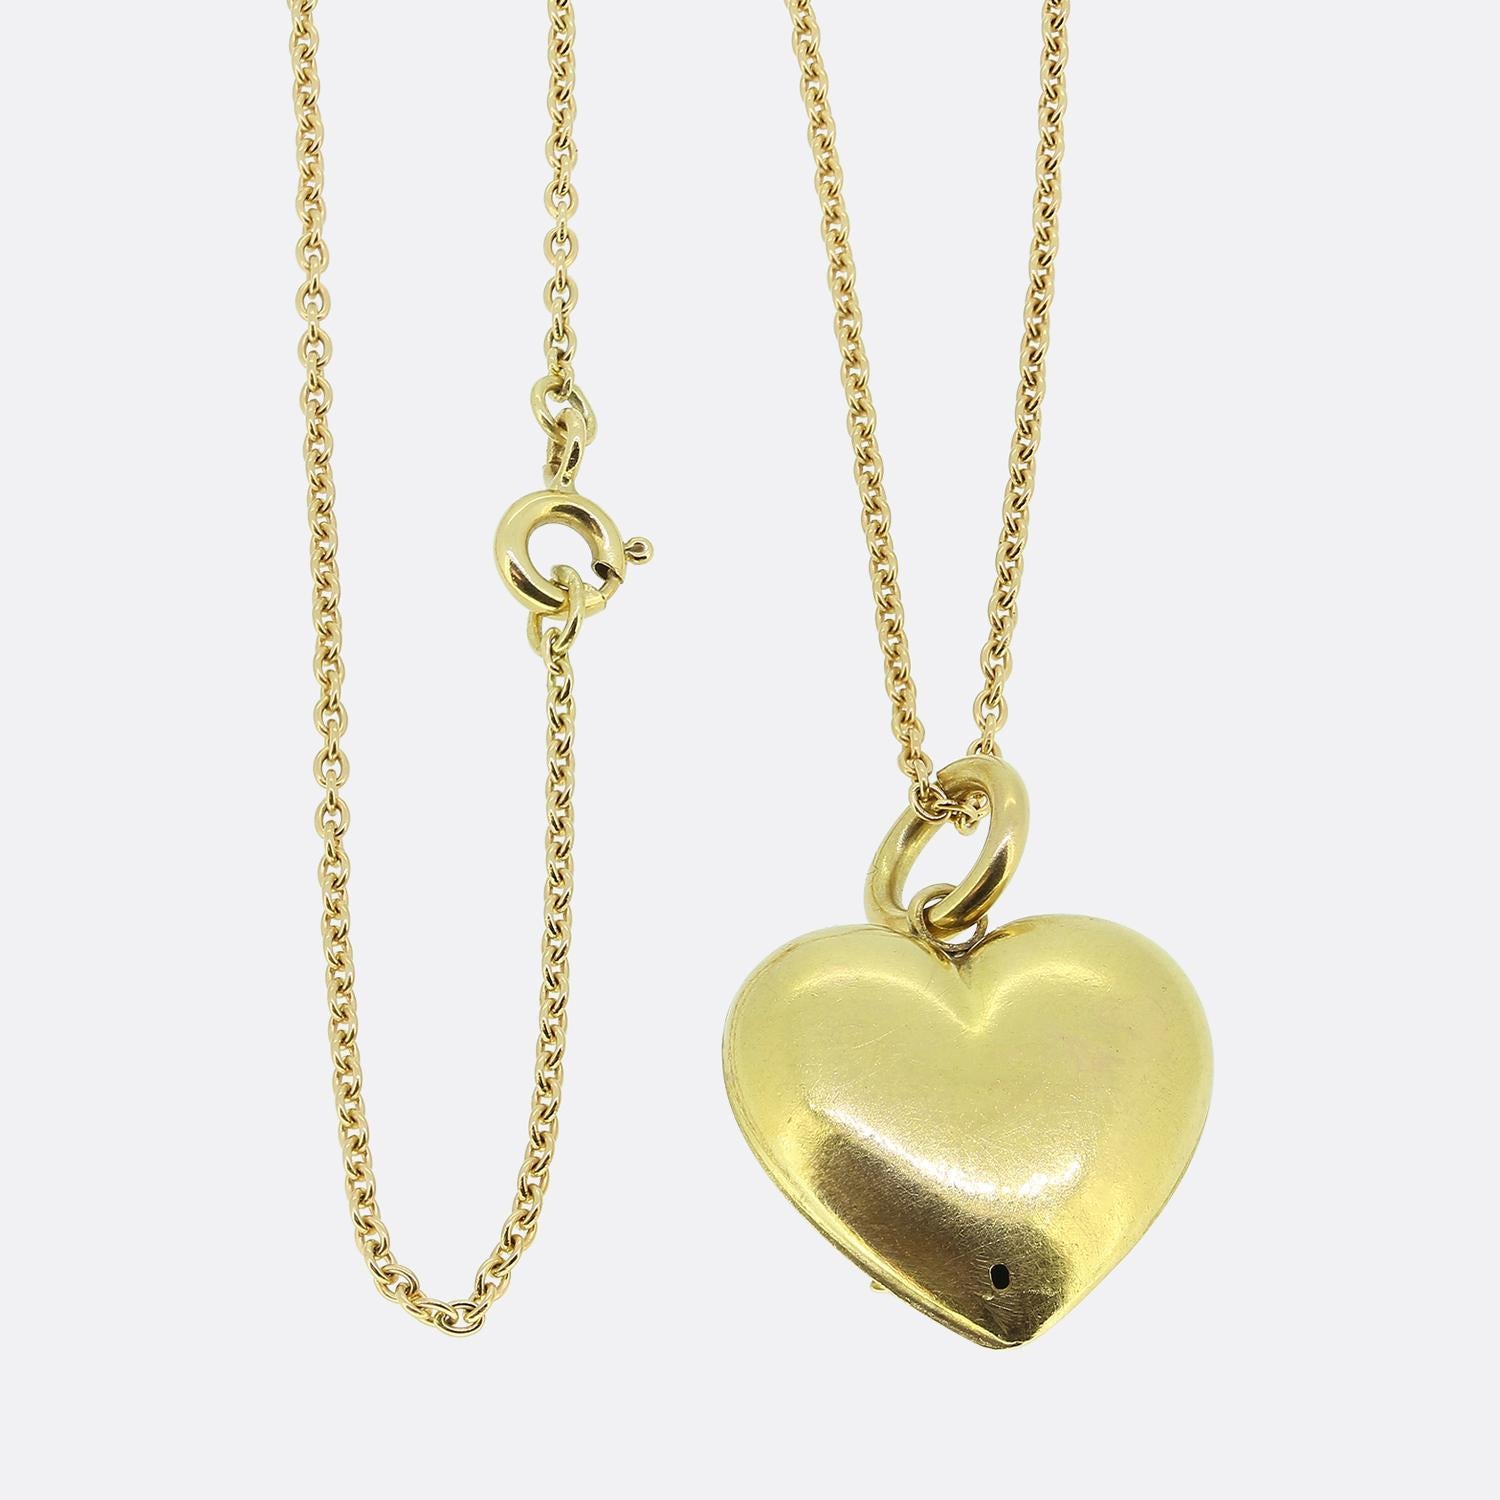 Here we have an excellently crafted 15ct yellow gold pearl set pendant necklace. This antique pendant takes on the shape of a love heart which plays host to a finely detailed three leaf clover motif at the centre. This design has been set with a